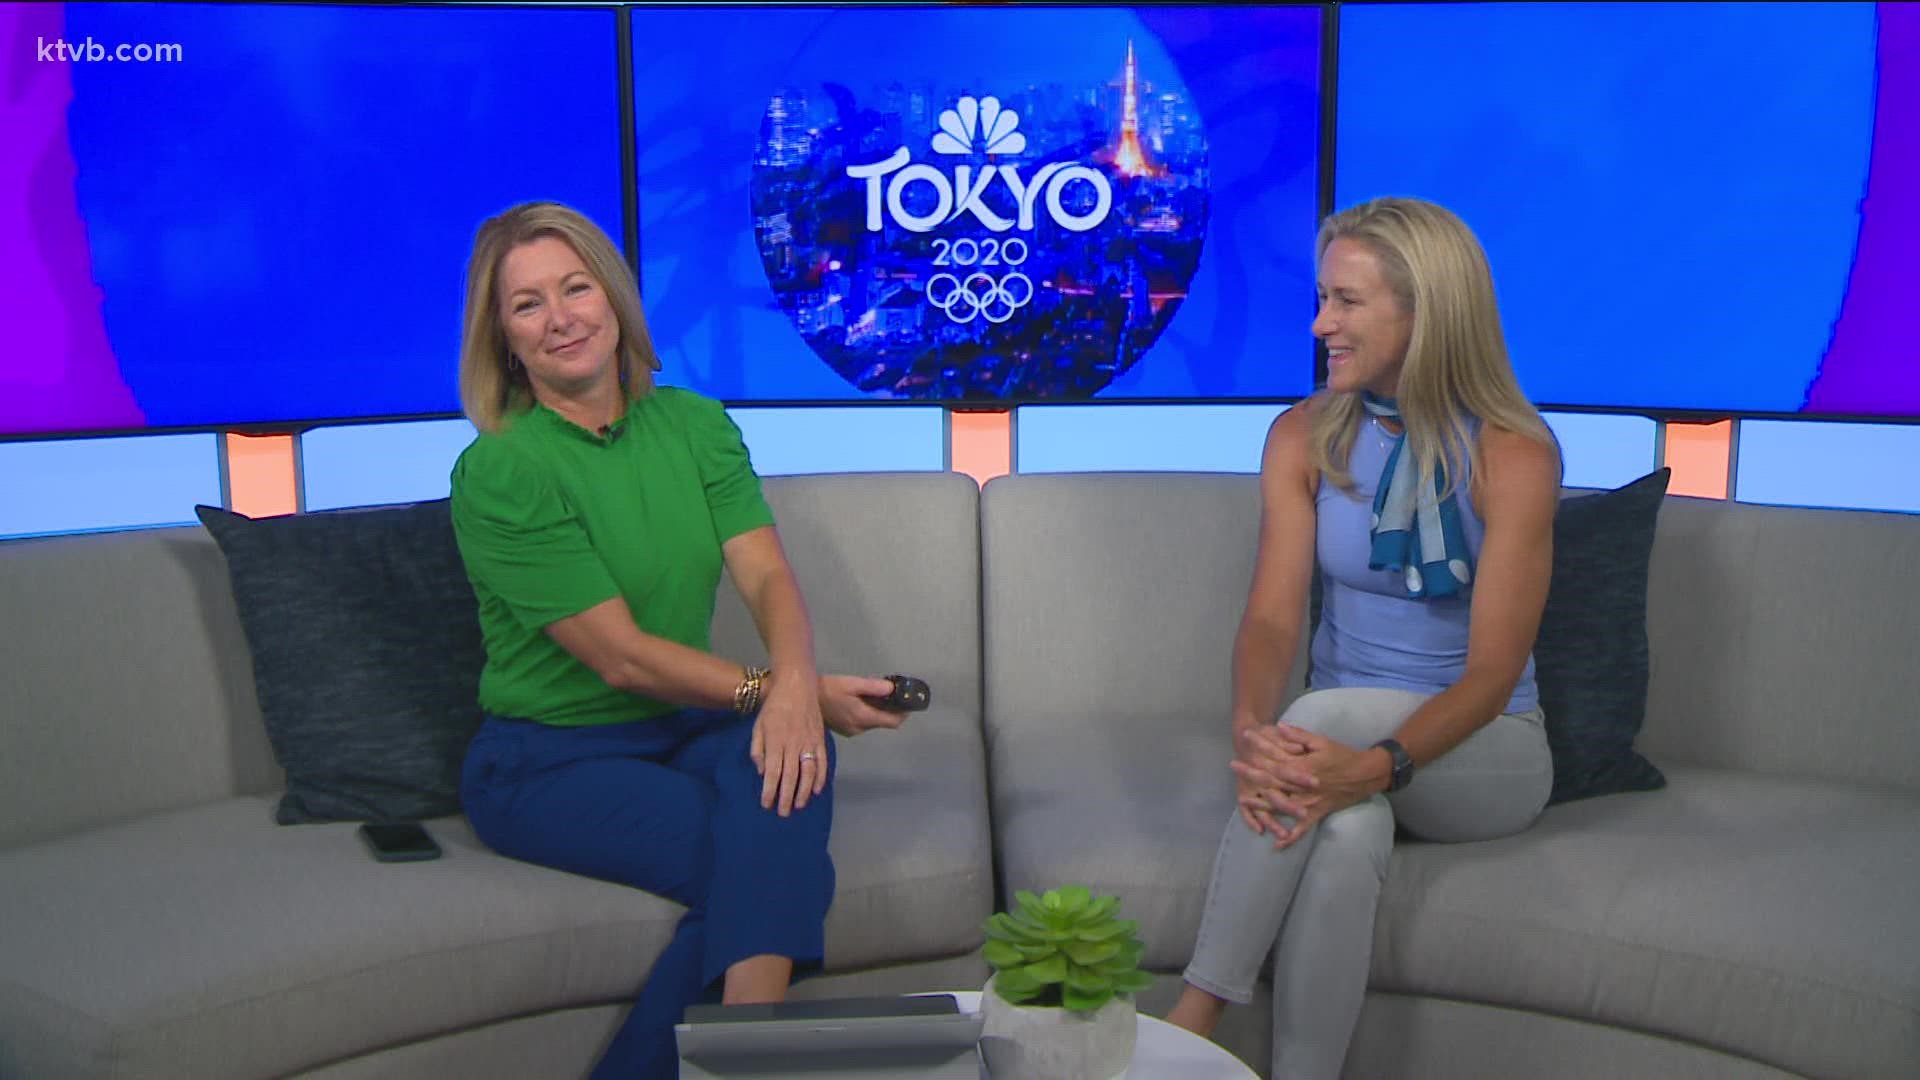 Comfort food, meditation or a favorite song are some of the ways athletes get ready for their time to shine at the Olympics.